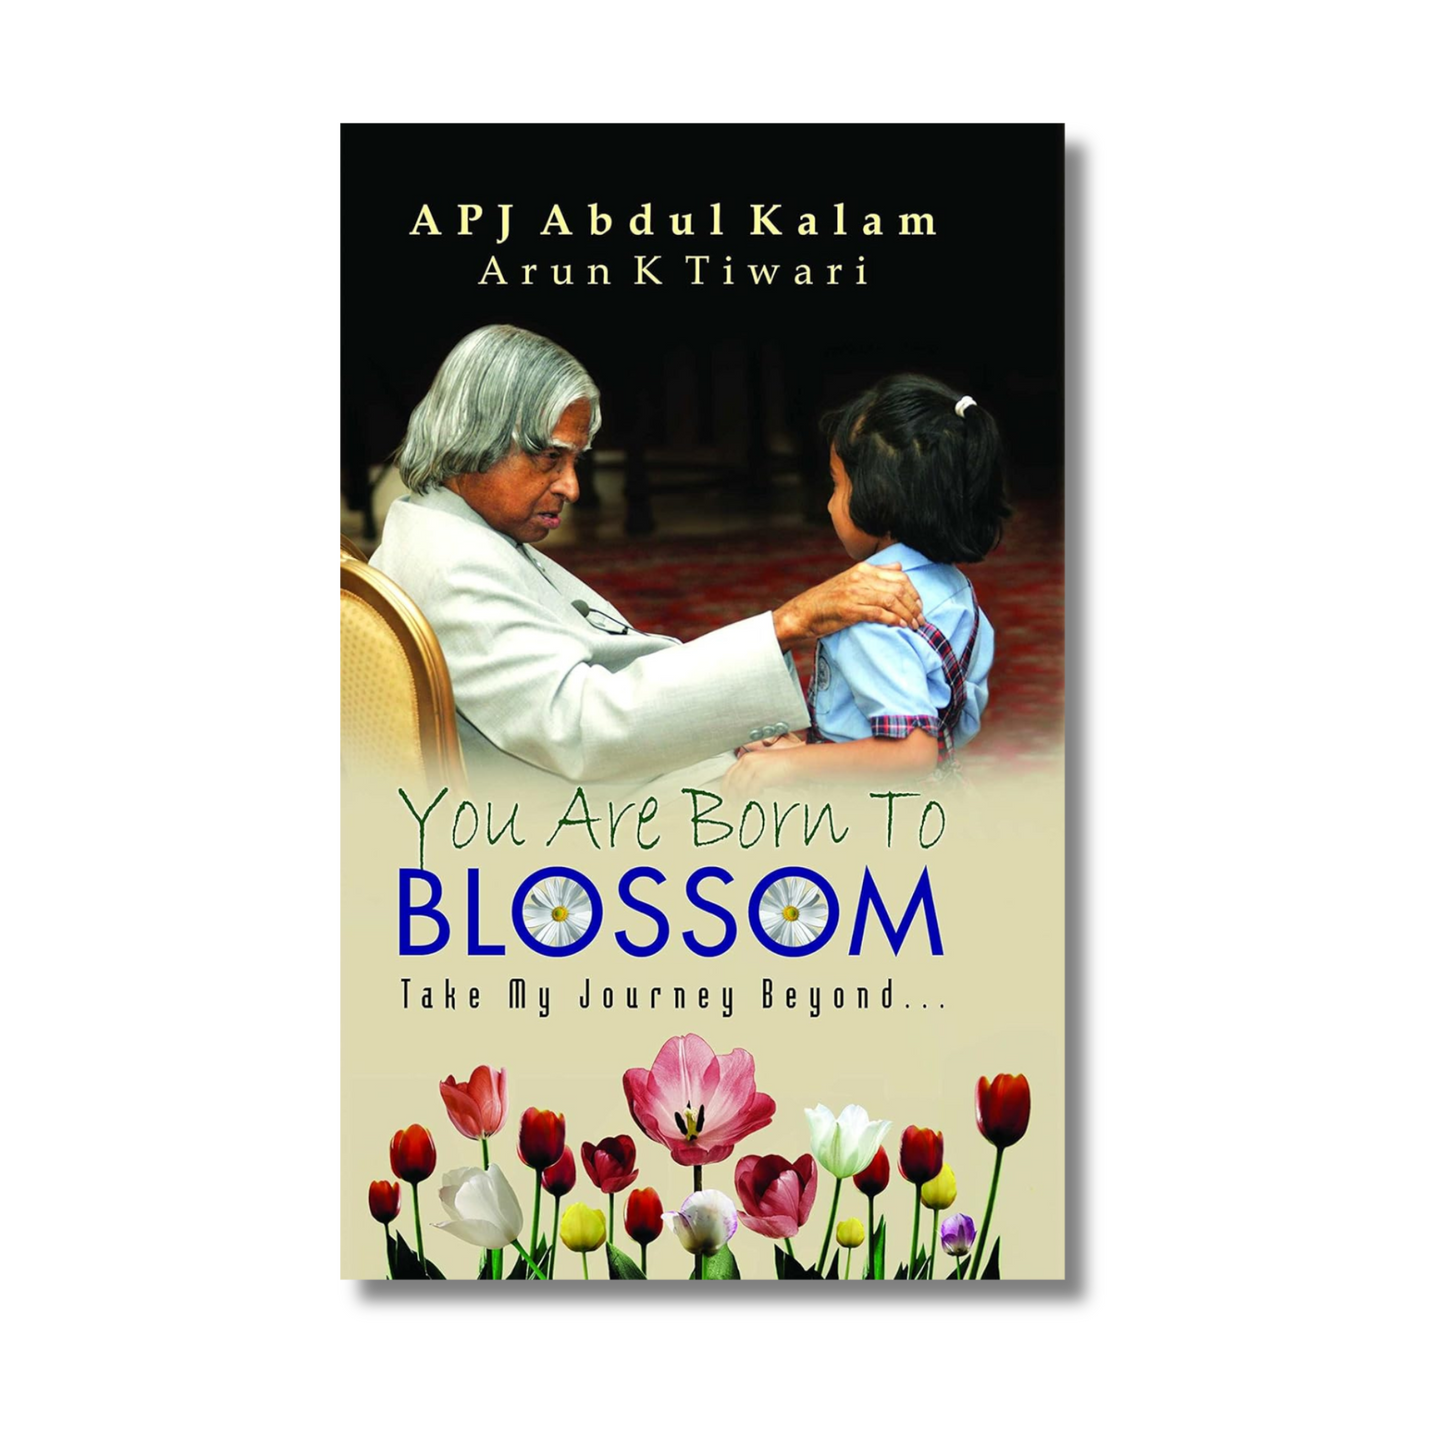 You Are Born to Blossom by Dr APJ Abdul Kalam (Paperback)